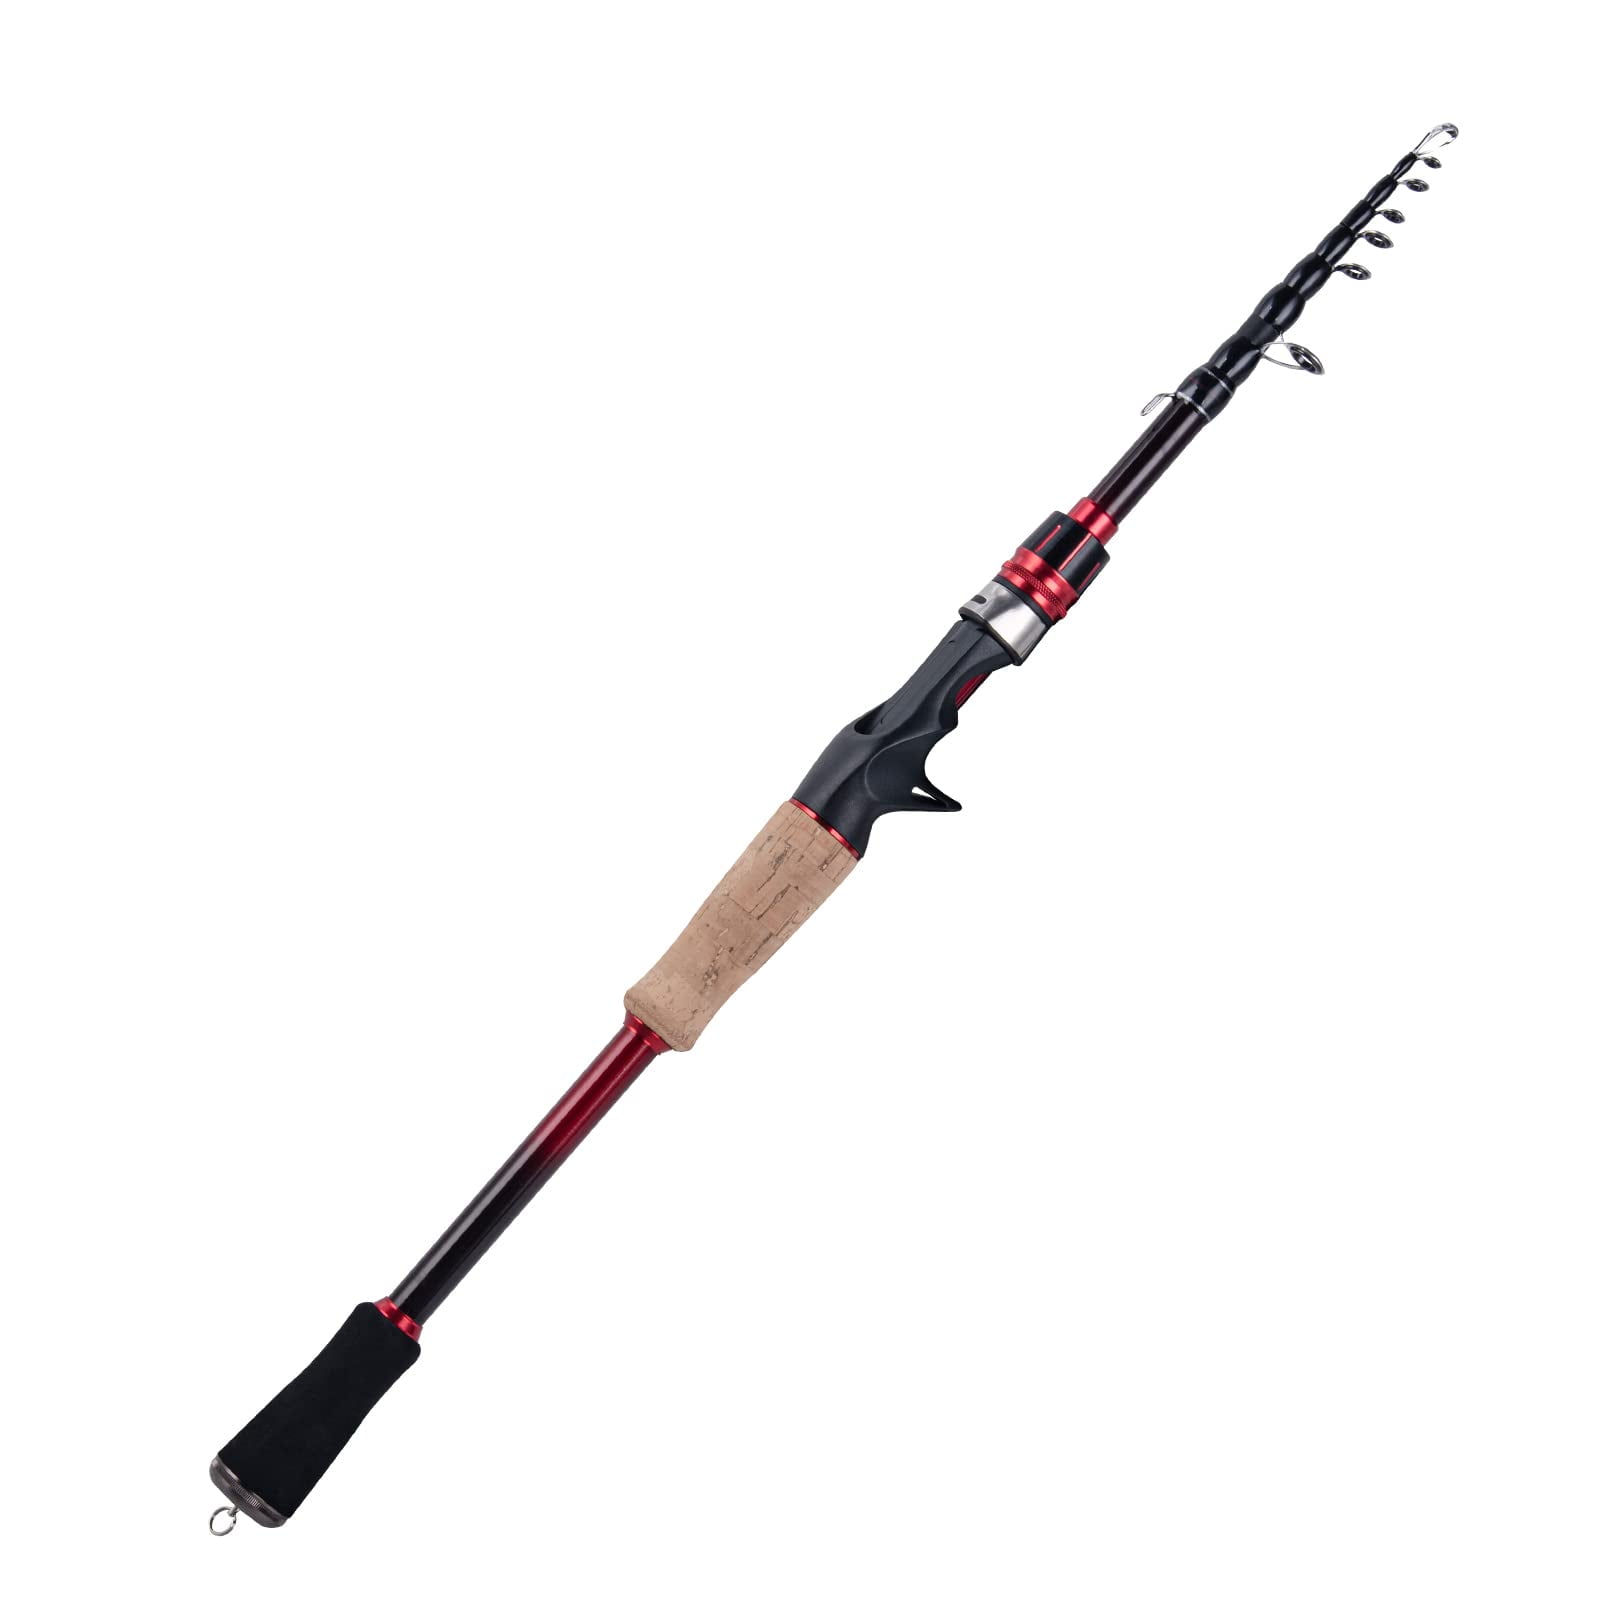 Goture Travel Telescopic Fishing Rod - 24T Carbon Casting & Spinning Rod  with Cork/EVA Grip Handle, Lightweight Portable Bass Fishing Pole for  Freshwater & Saltwater 